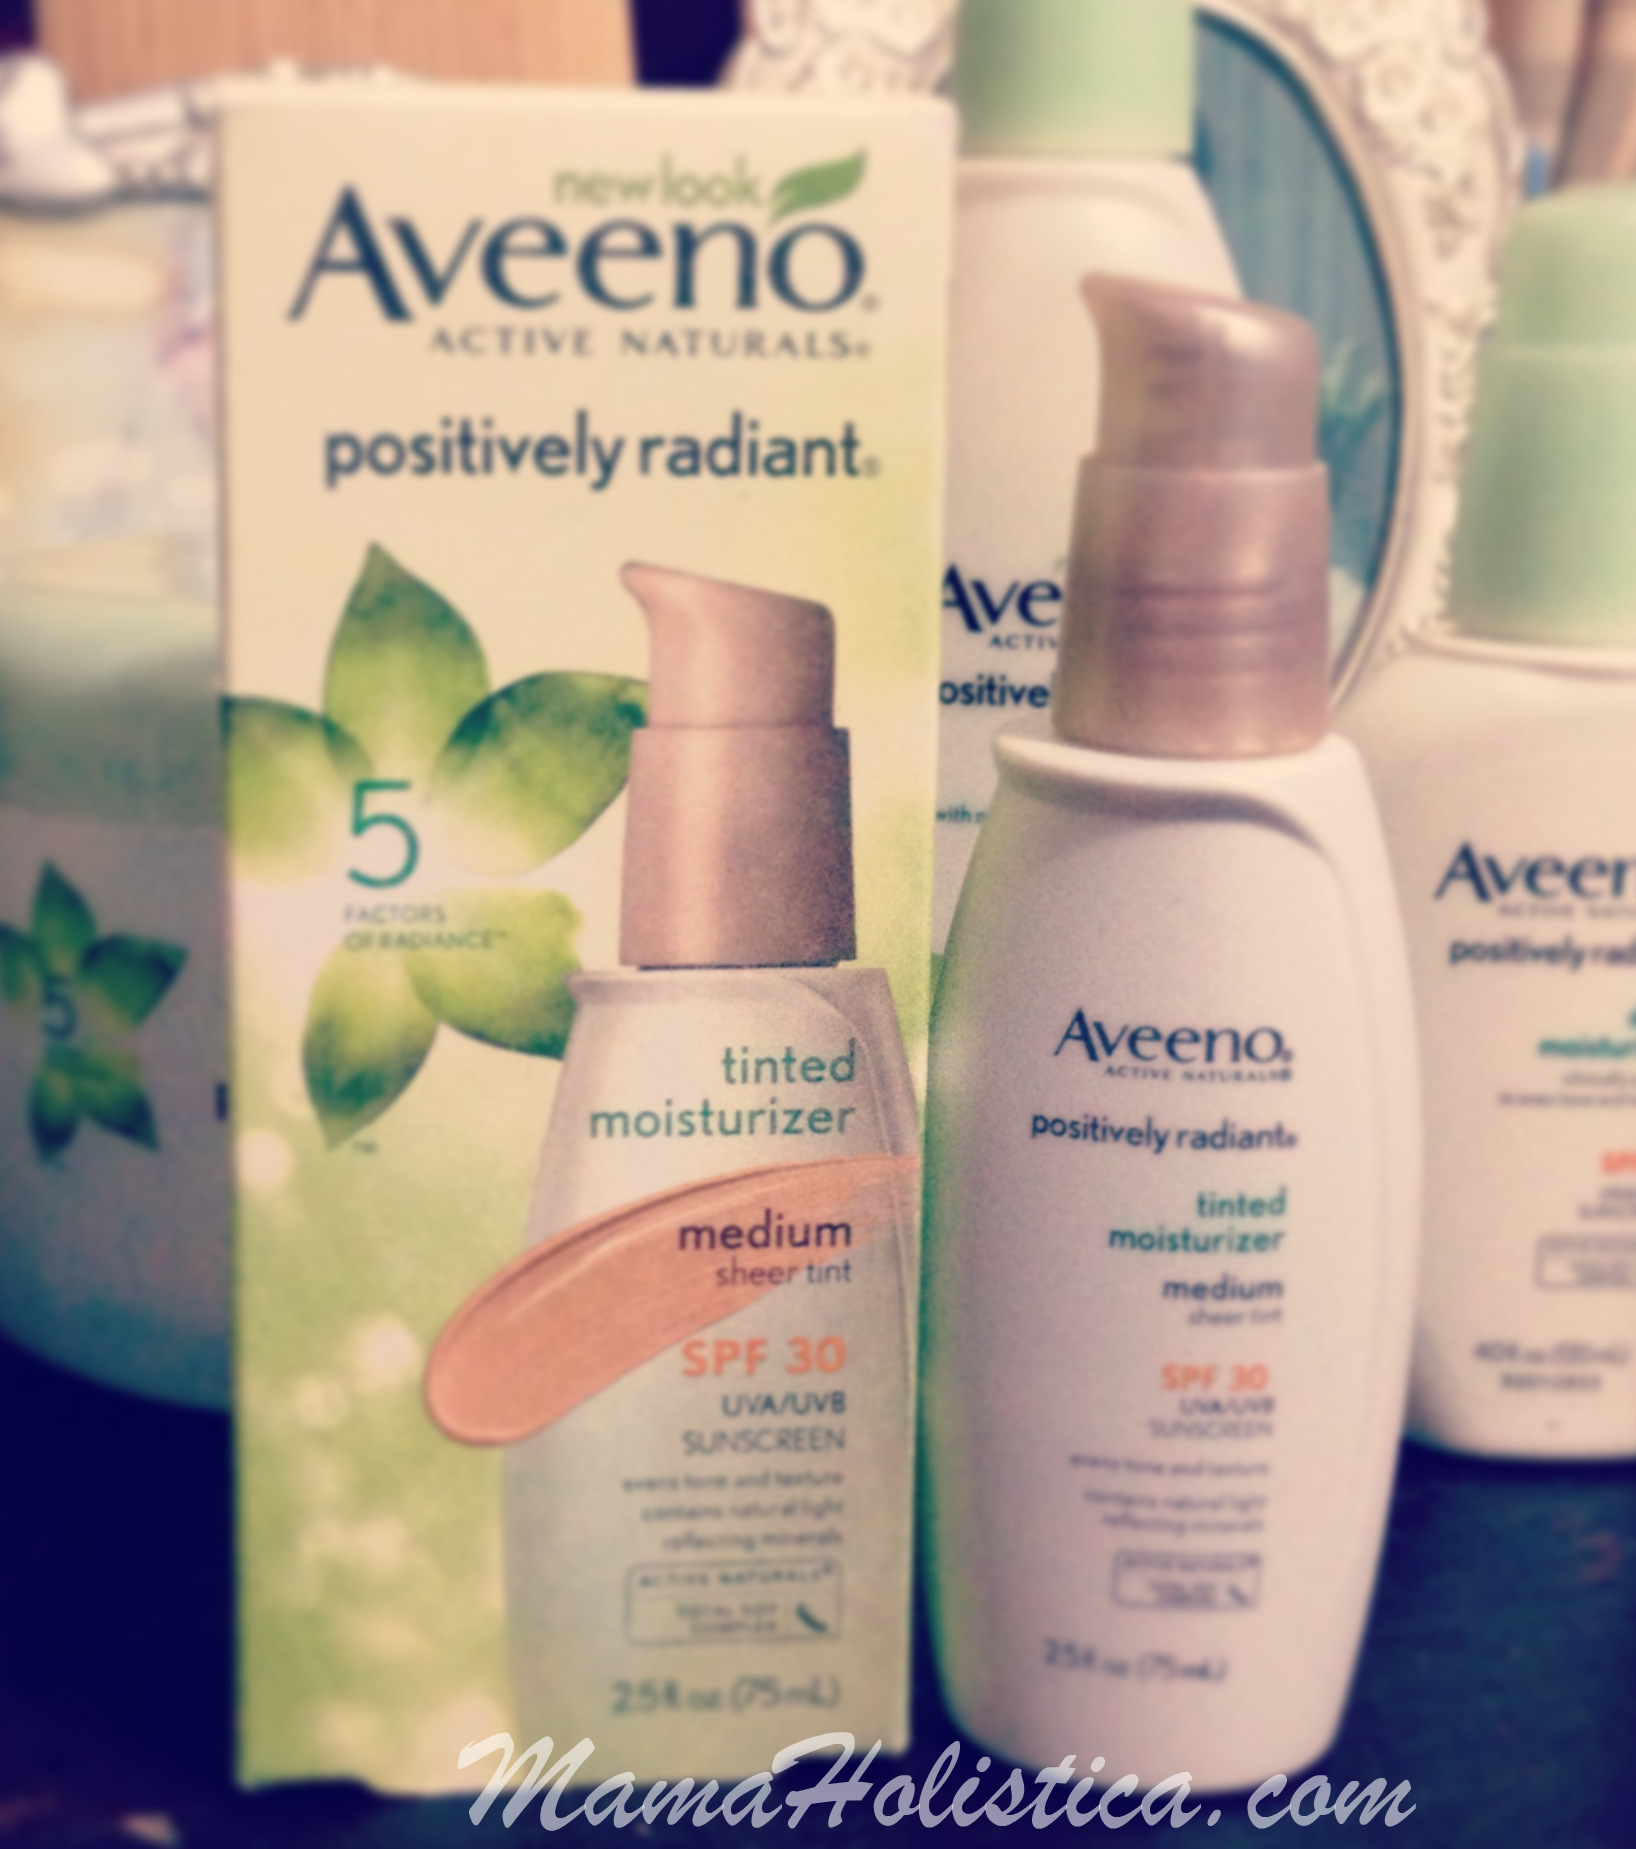 AVEENO® POSITIVELY RADIANT TINTED MOISTURIZER WITH SPF 30